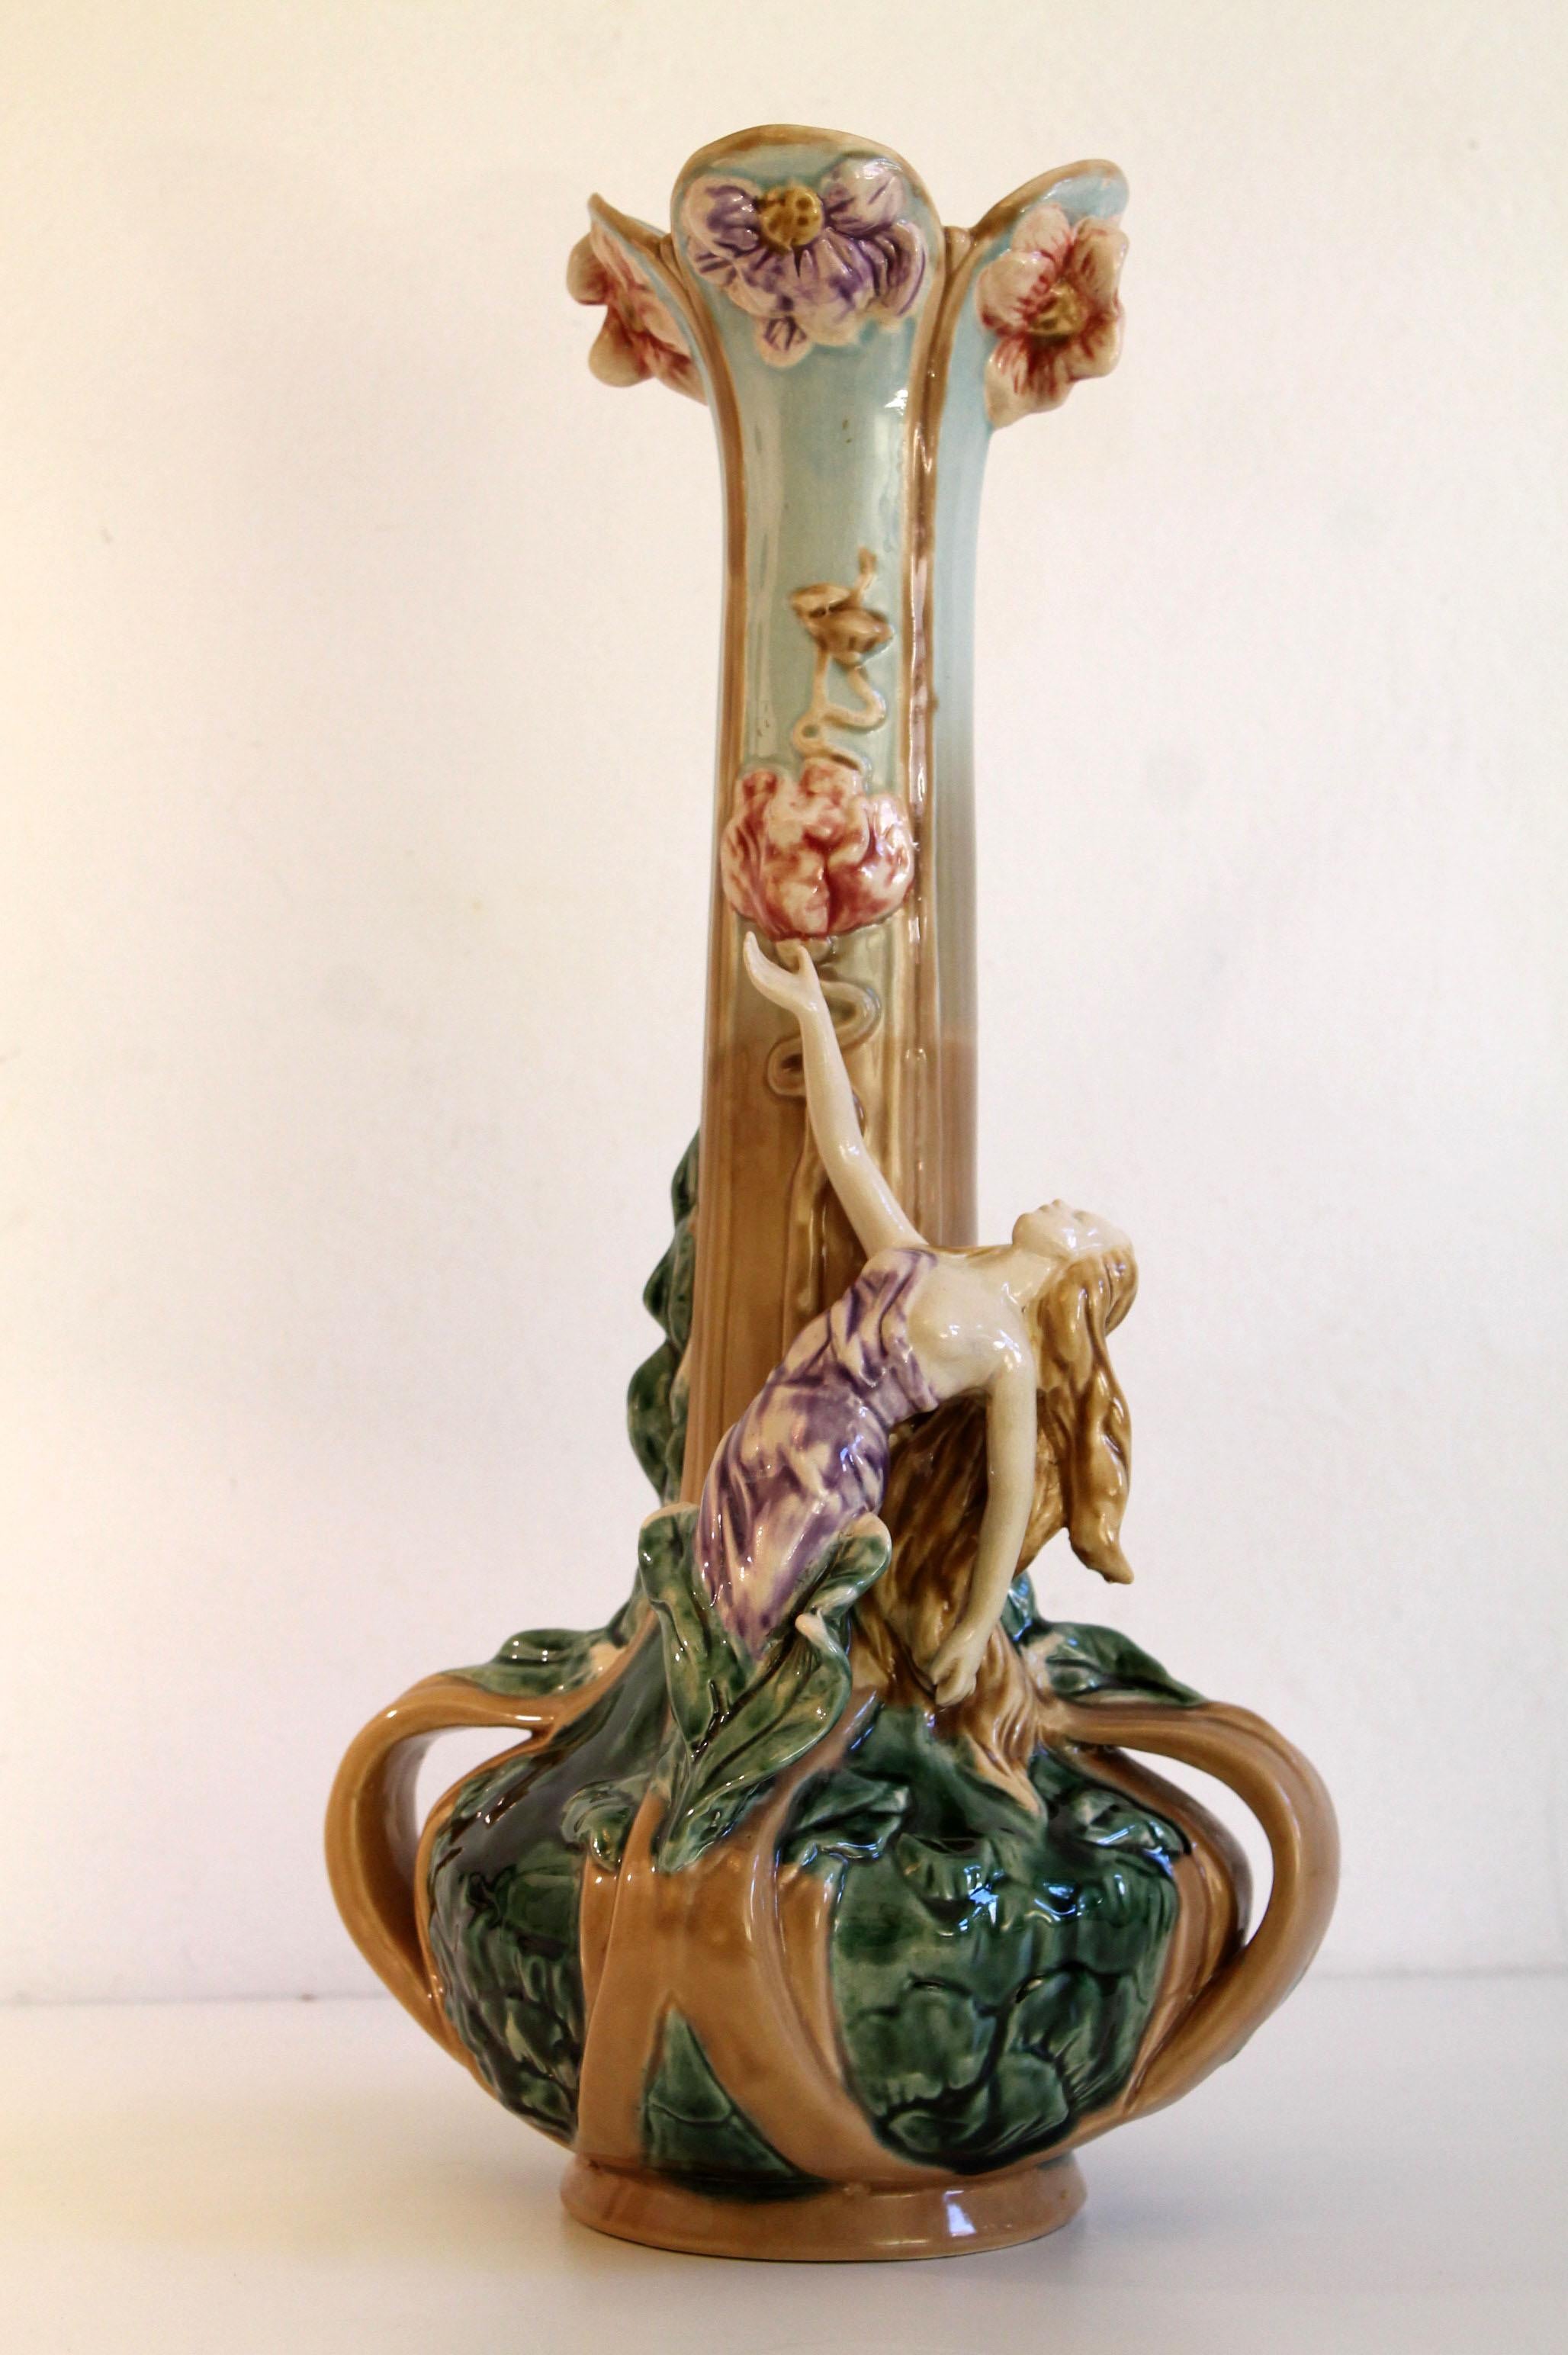 Manufacture: Bohemia Austria
Description: Delicate Vase with Woman and richly ornate with leaves and flowers
Year: circa 1900
Austrian Bohemian manufacturer stamp at bottom + model #2158
Condition: Pristine. (No chips, no cracks)
Measures: